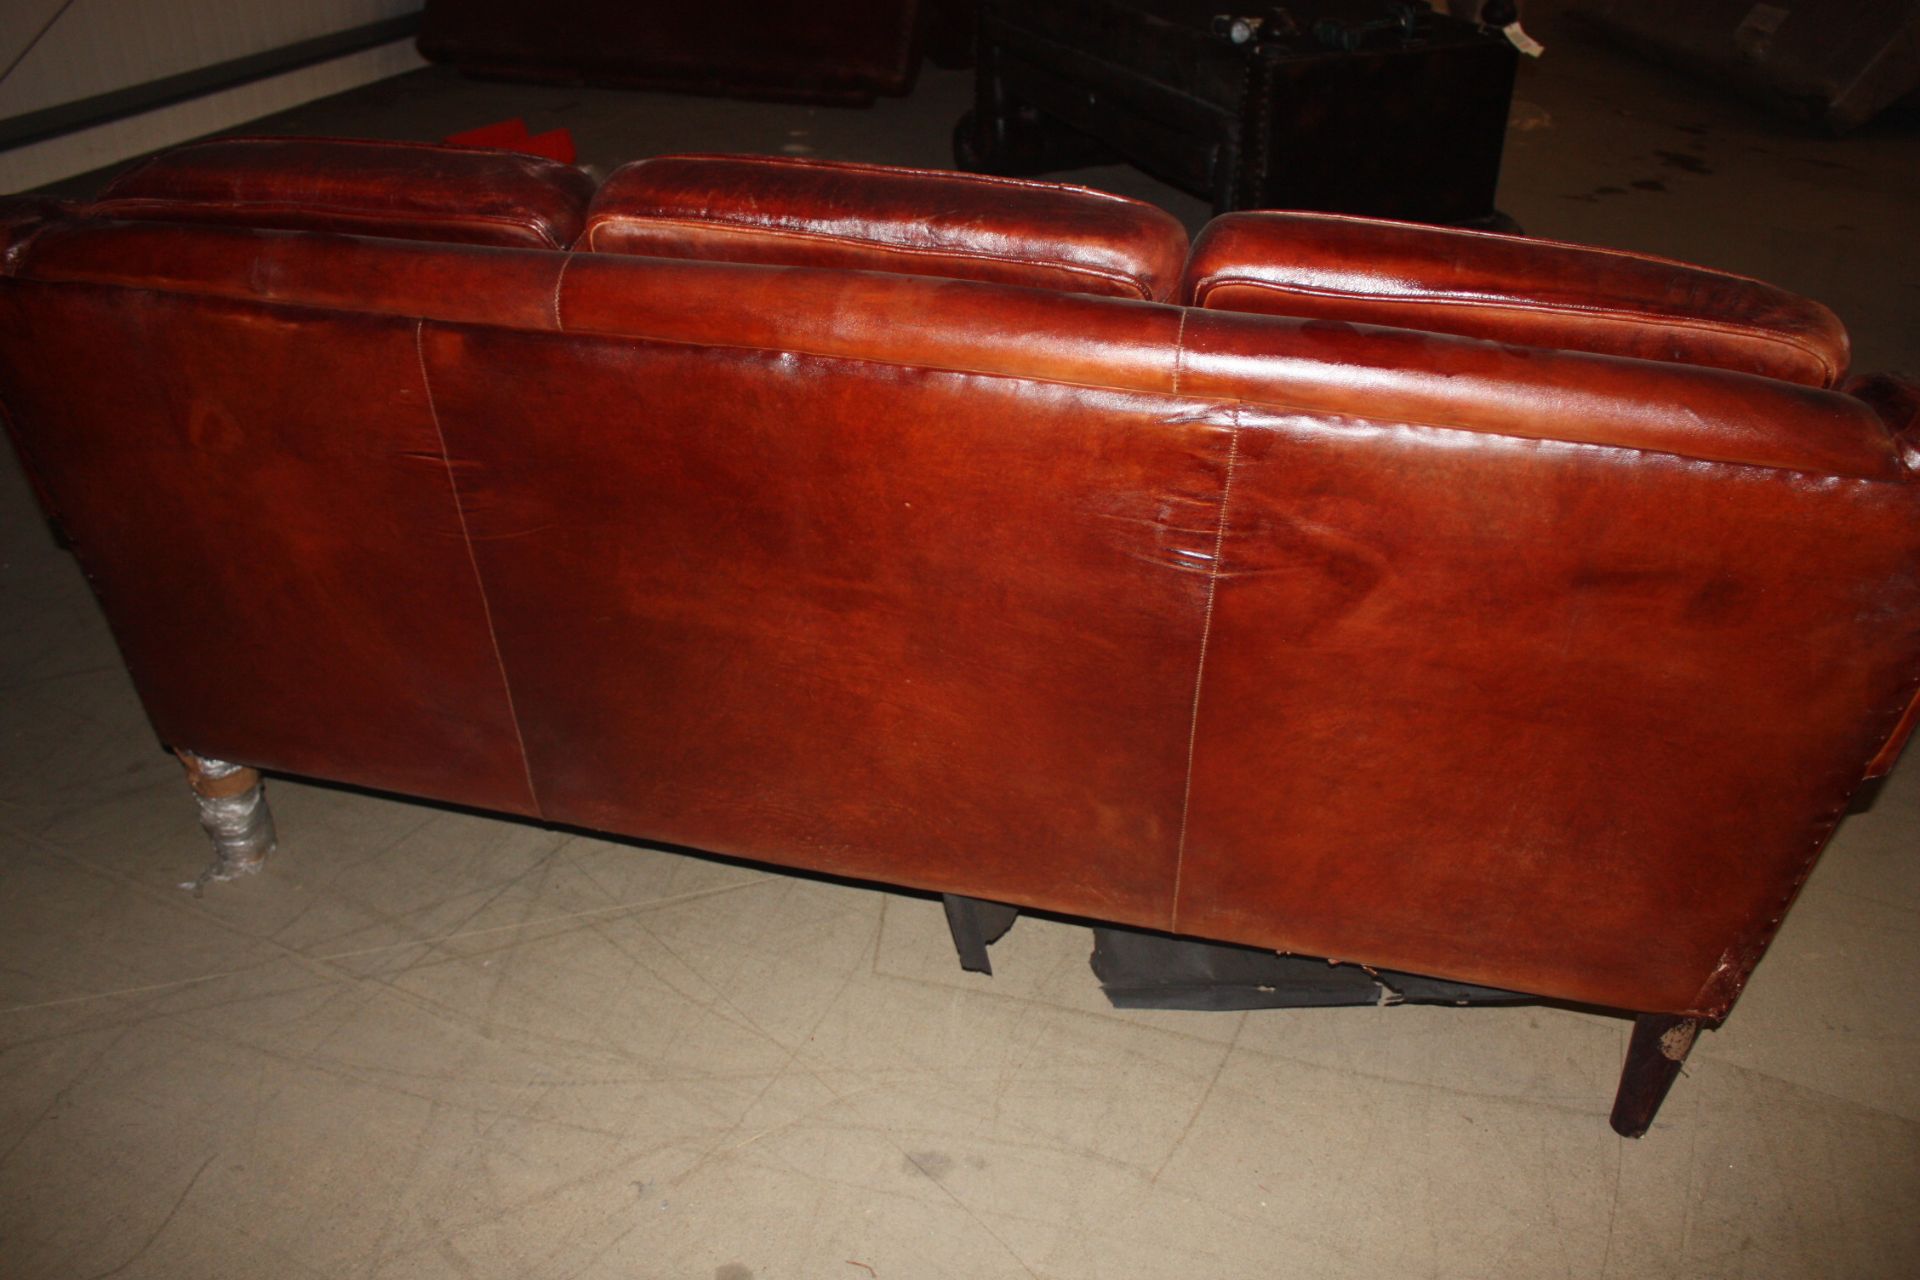 Chestnut 3 Seater Leather Sofa The Chestnut 3 Seater Sofa Is Solidly Constructed On A Wood Frame, - Image 4 of 4